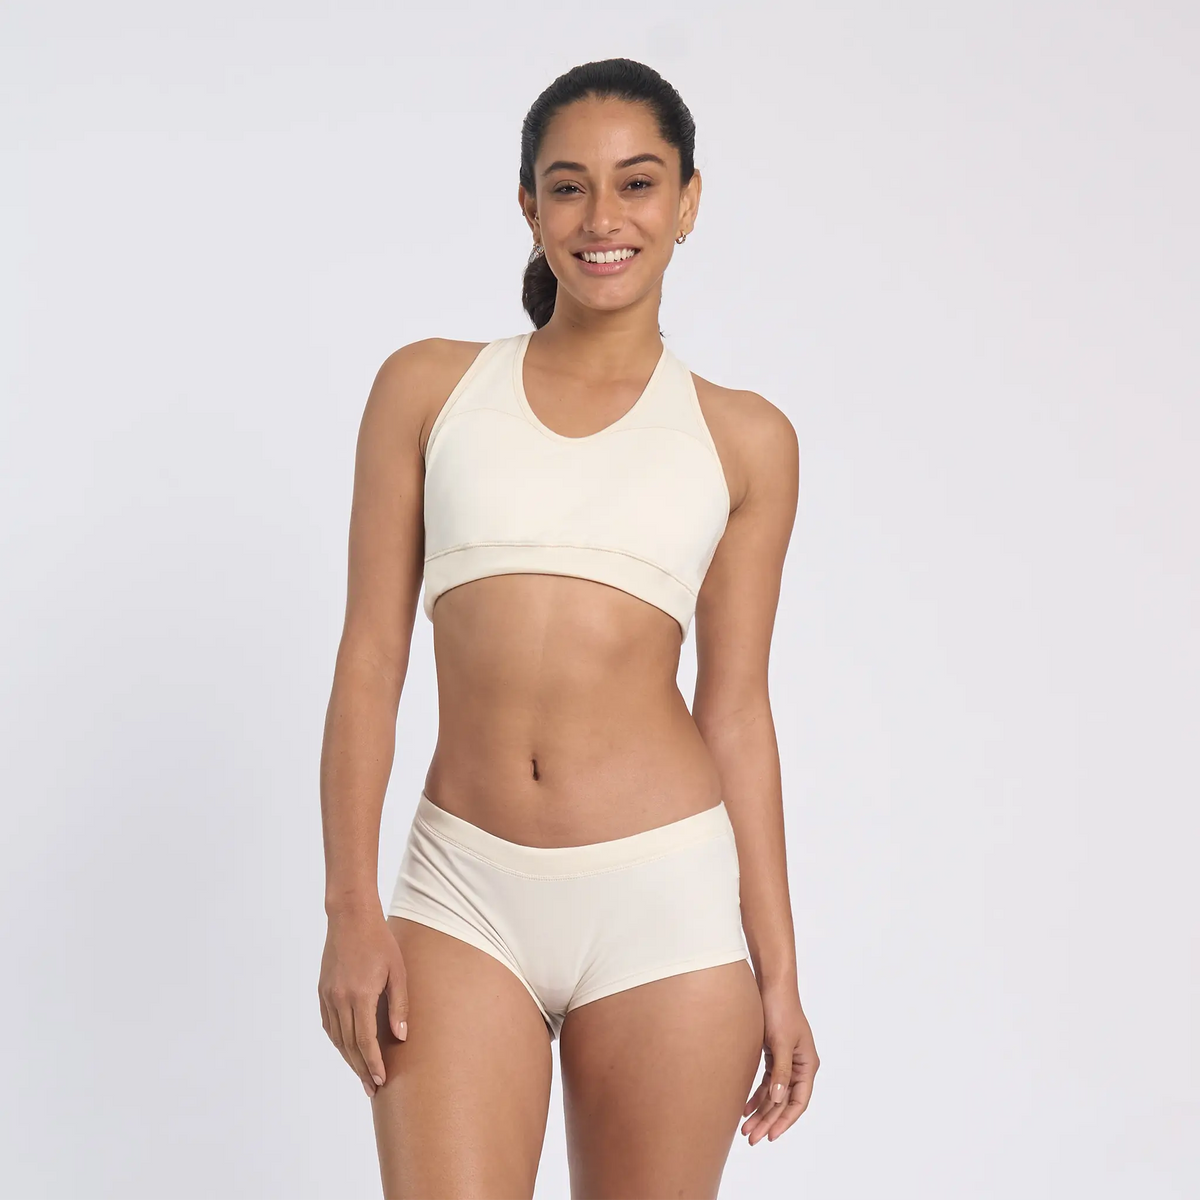 natural womens hypoallergenic panties color Undyed